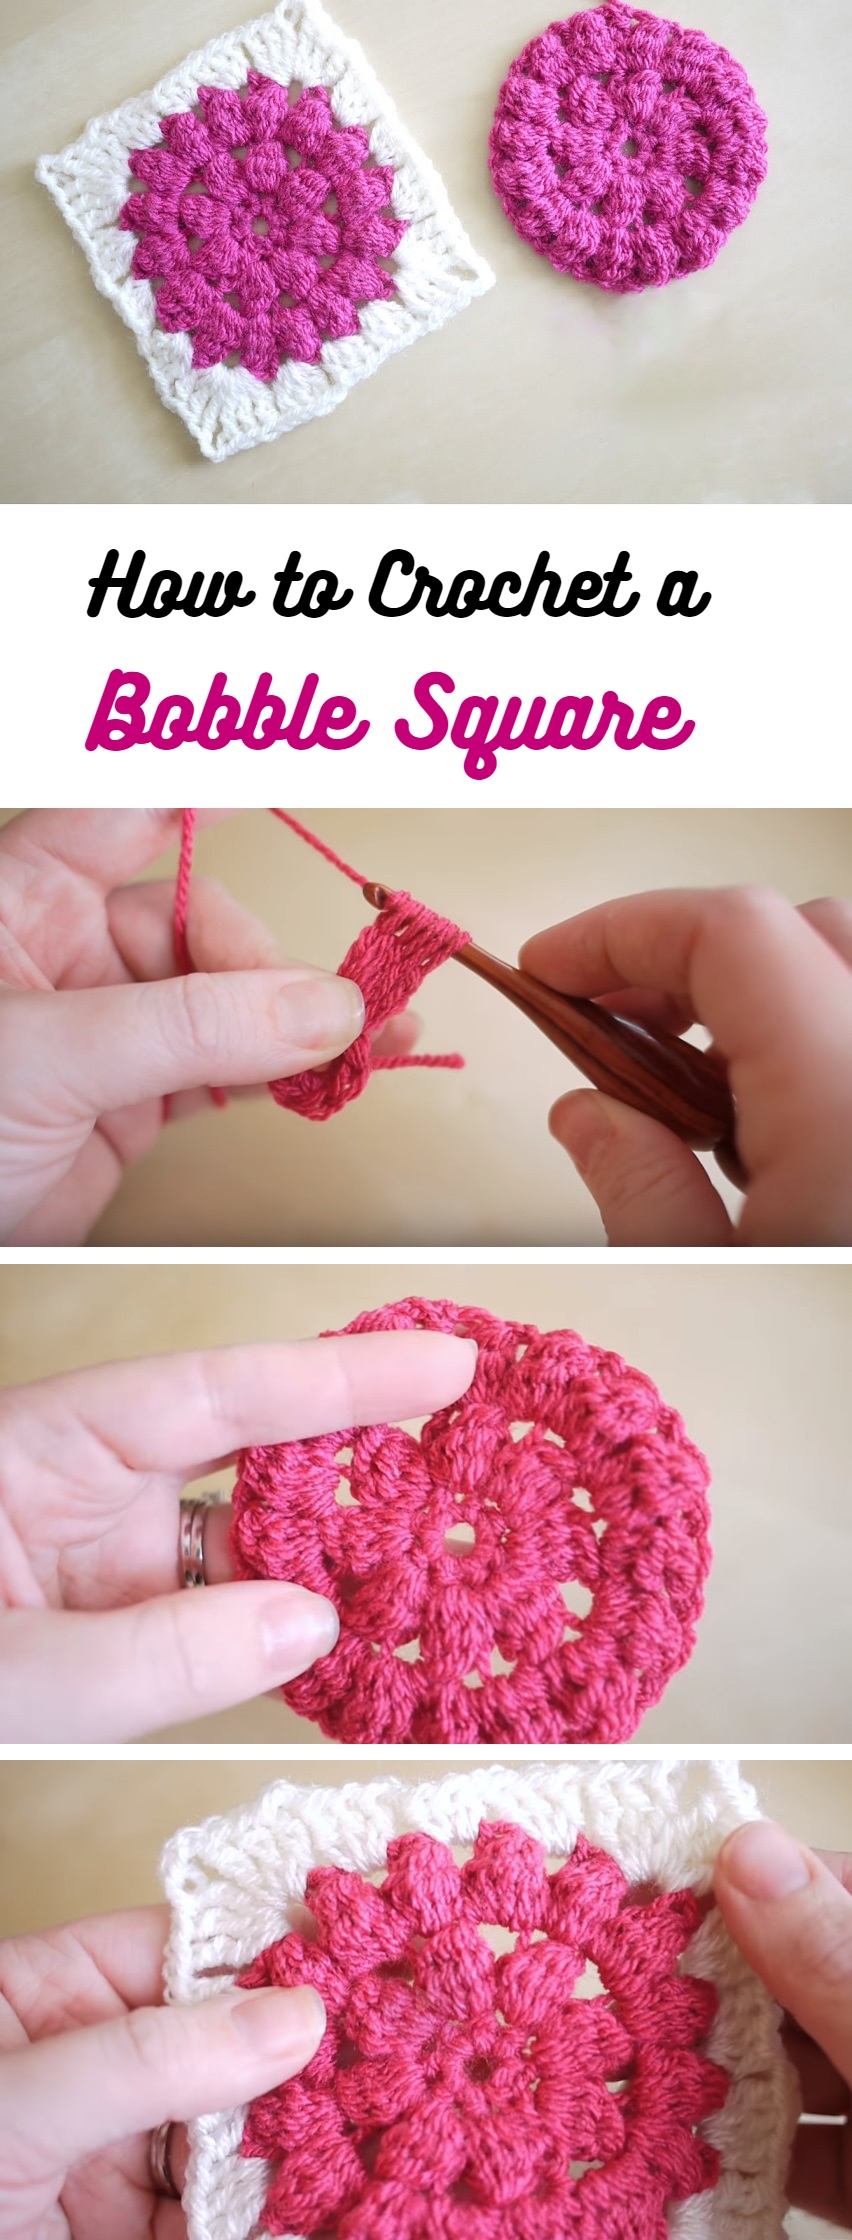 How to Crochet a Bubble Square